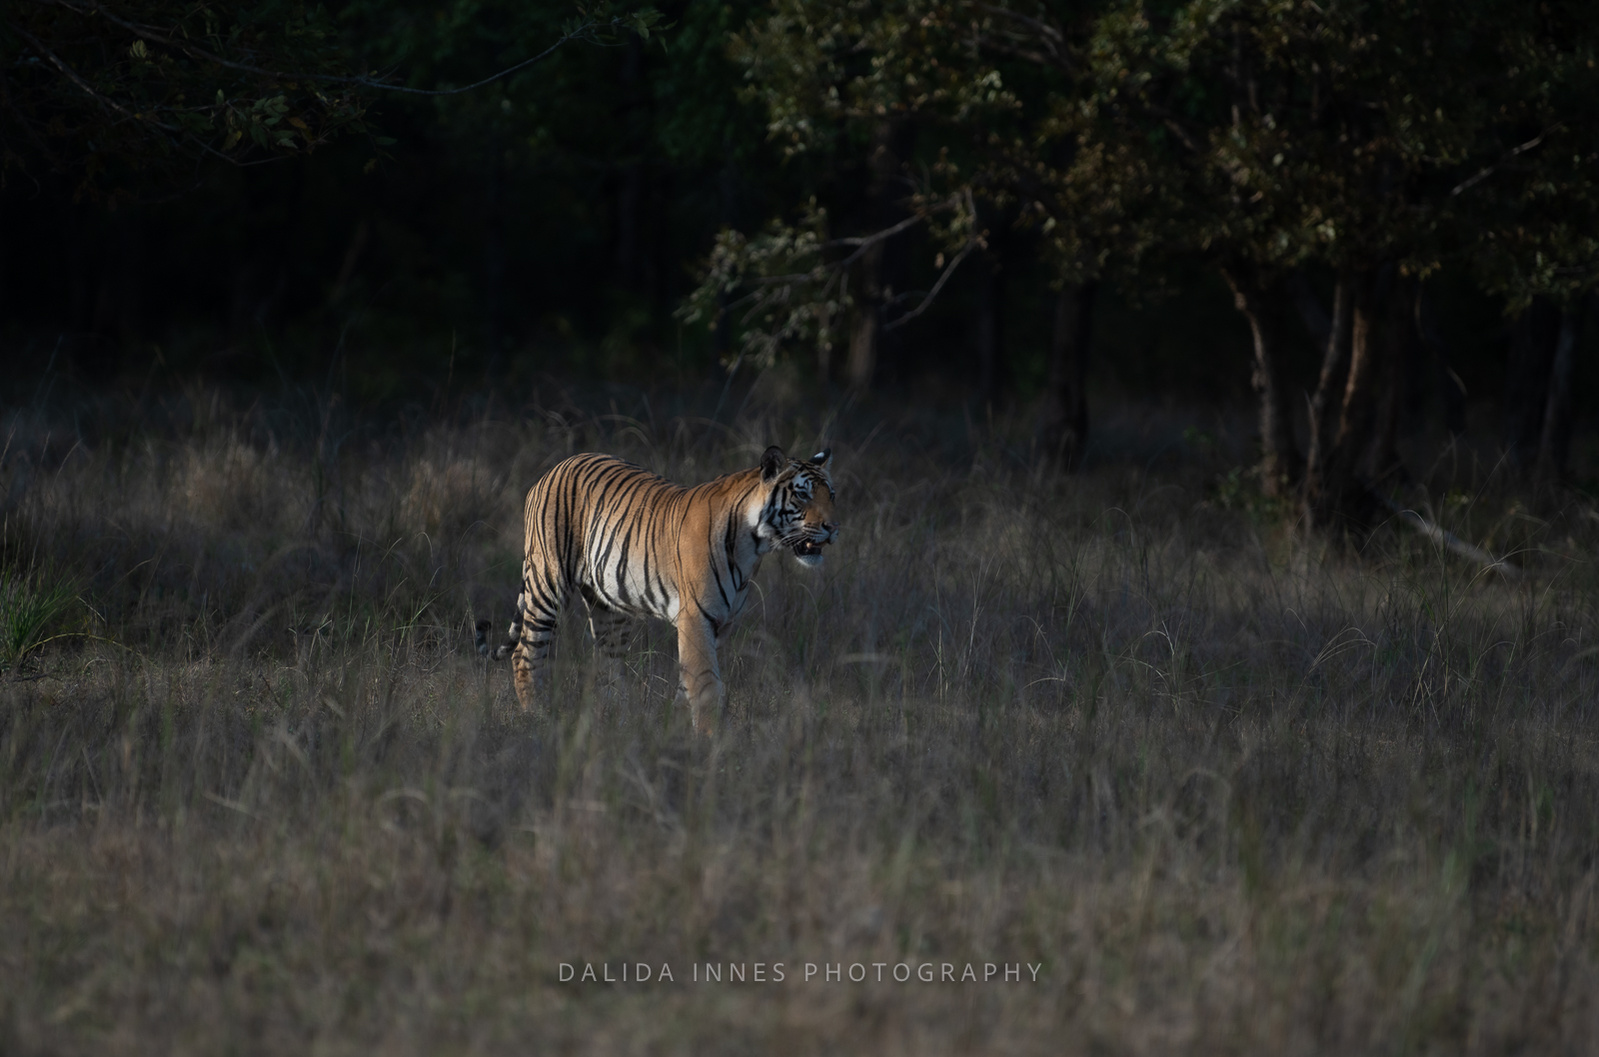 The tiger watching a spotted deer